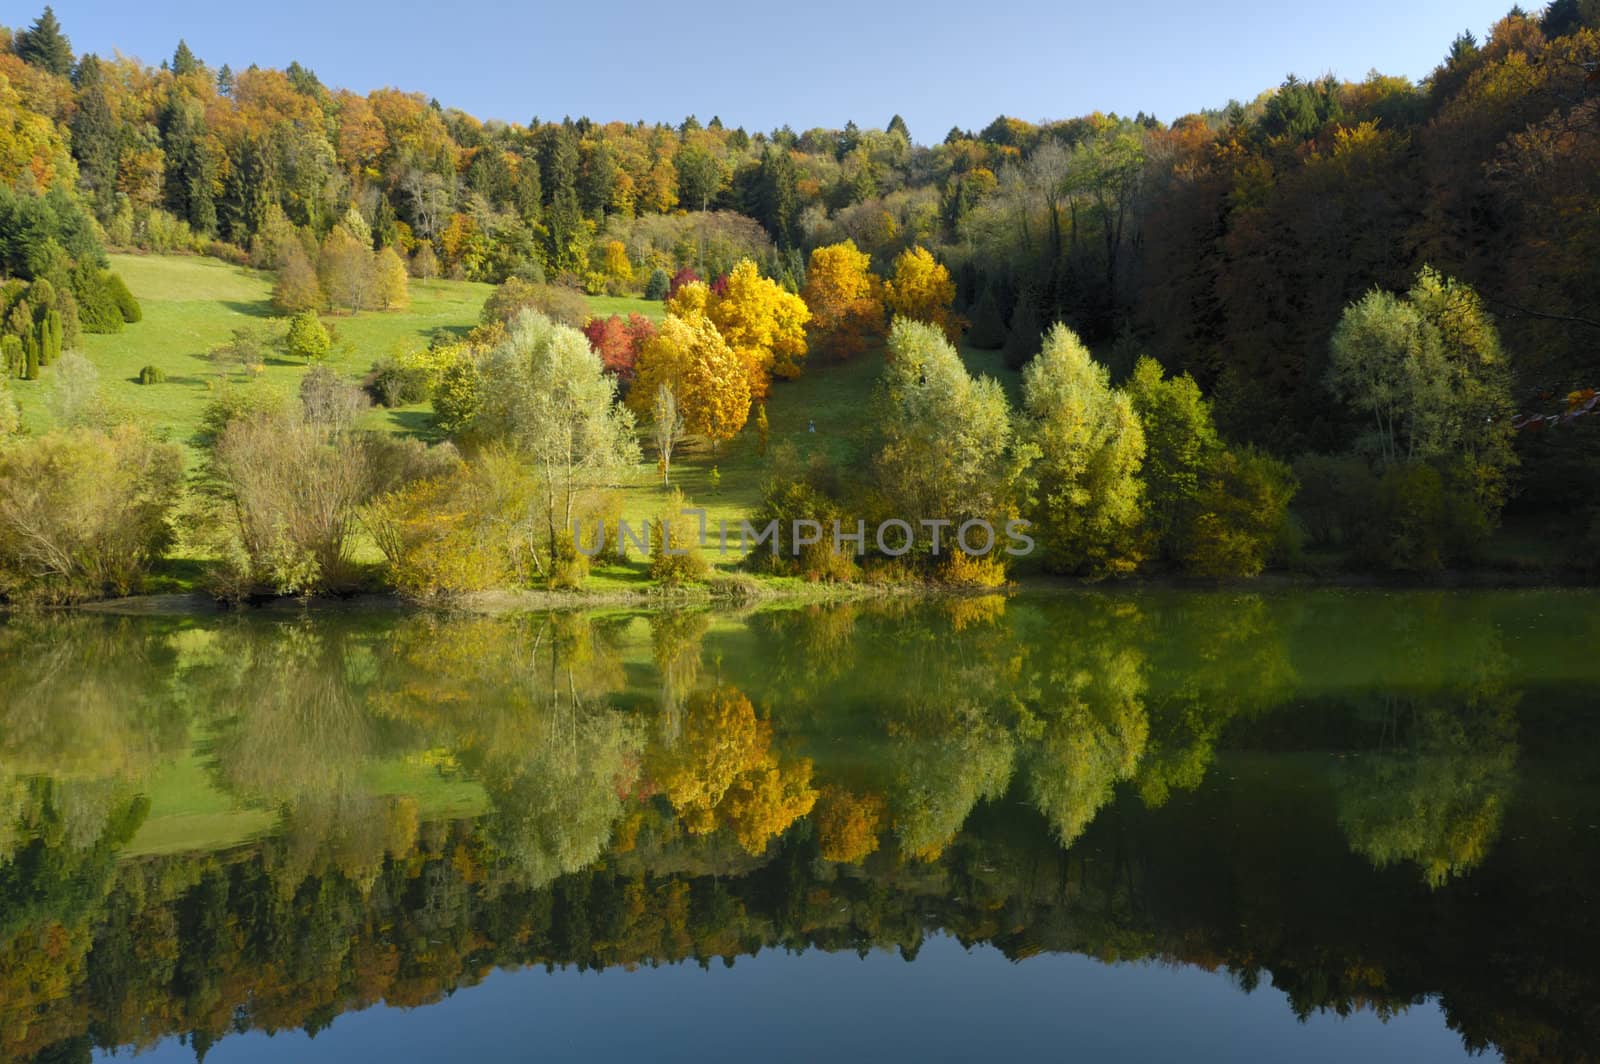 The colours of autumn in an arboretum. Taken in the early-morning light, under a clear blue sky. The flame-like colours of the trees are reflected in the stil waters of a lake. A tiny figure can be seen walking past the brightest trees.